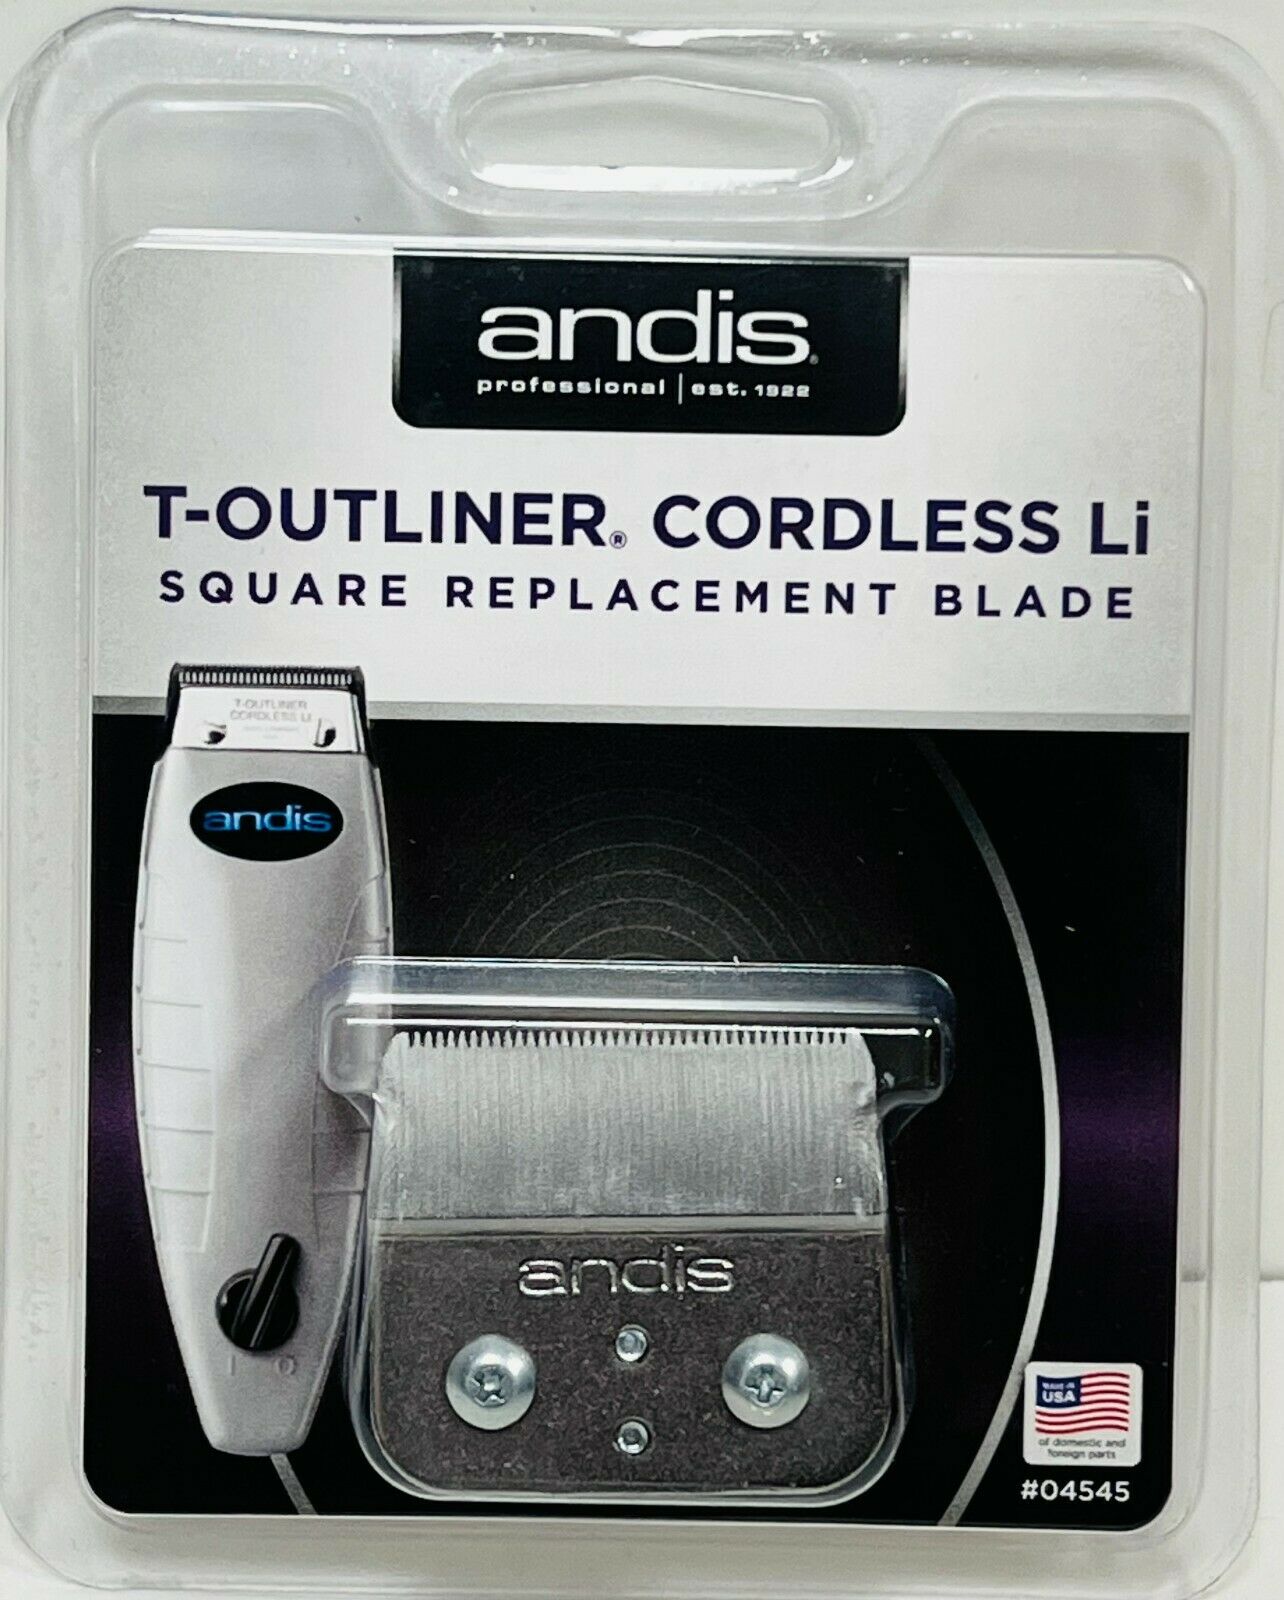 Andis Professional T-Outliner Cordless Li Square Replacement Blade (04545)